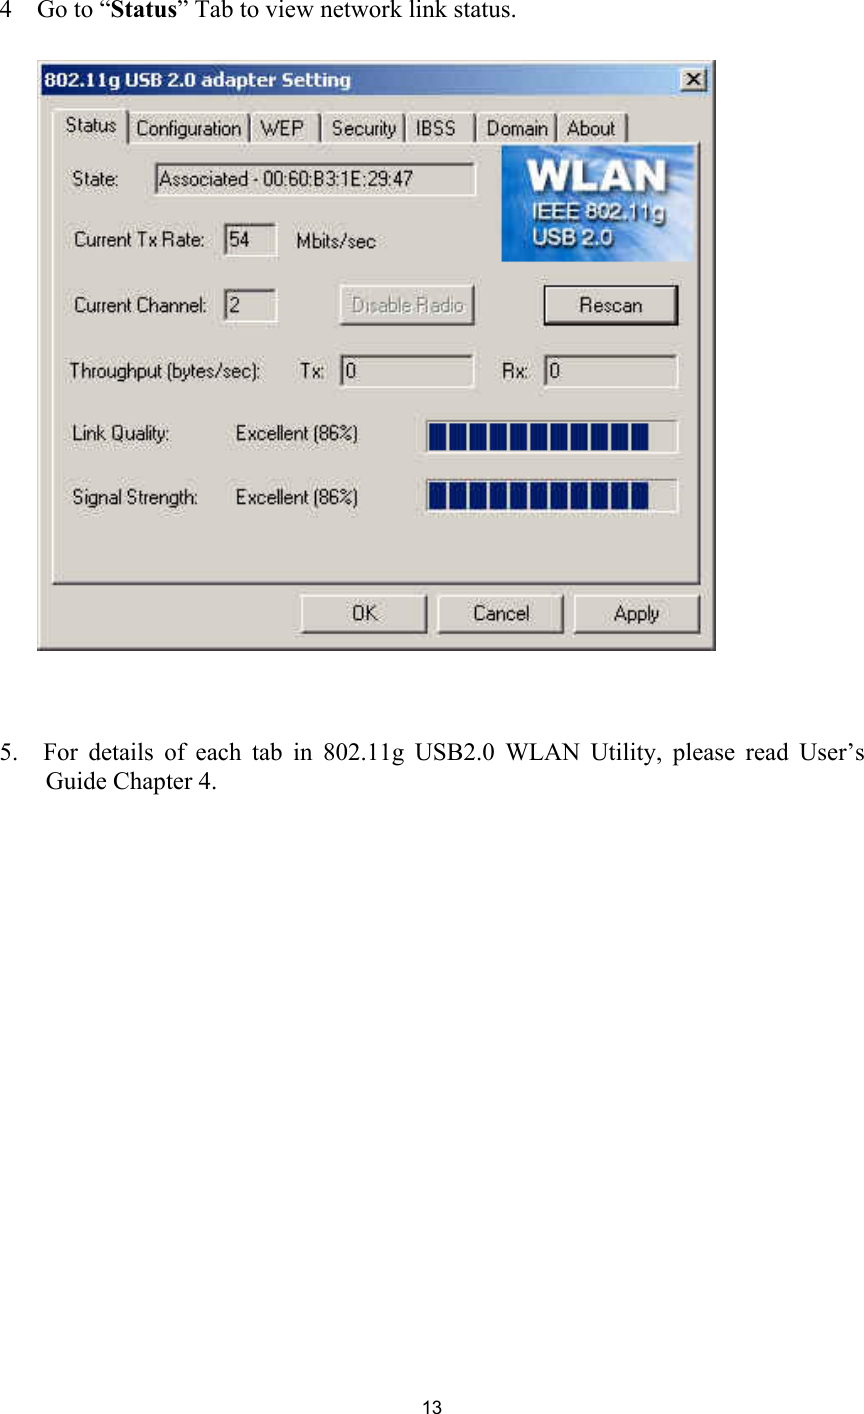 134  Go to “Status” Tab to view network link status.5.  For details of each tab in 802.11g USB2.0 WLAN Utility, please read User’sGuide Chapter 4.